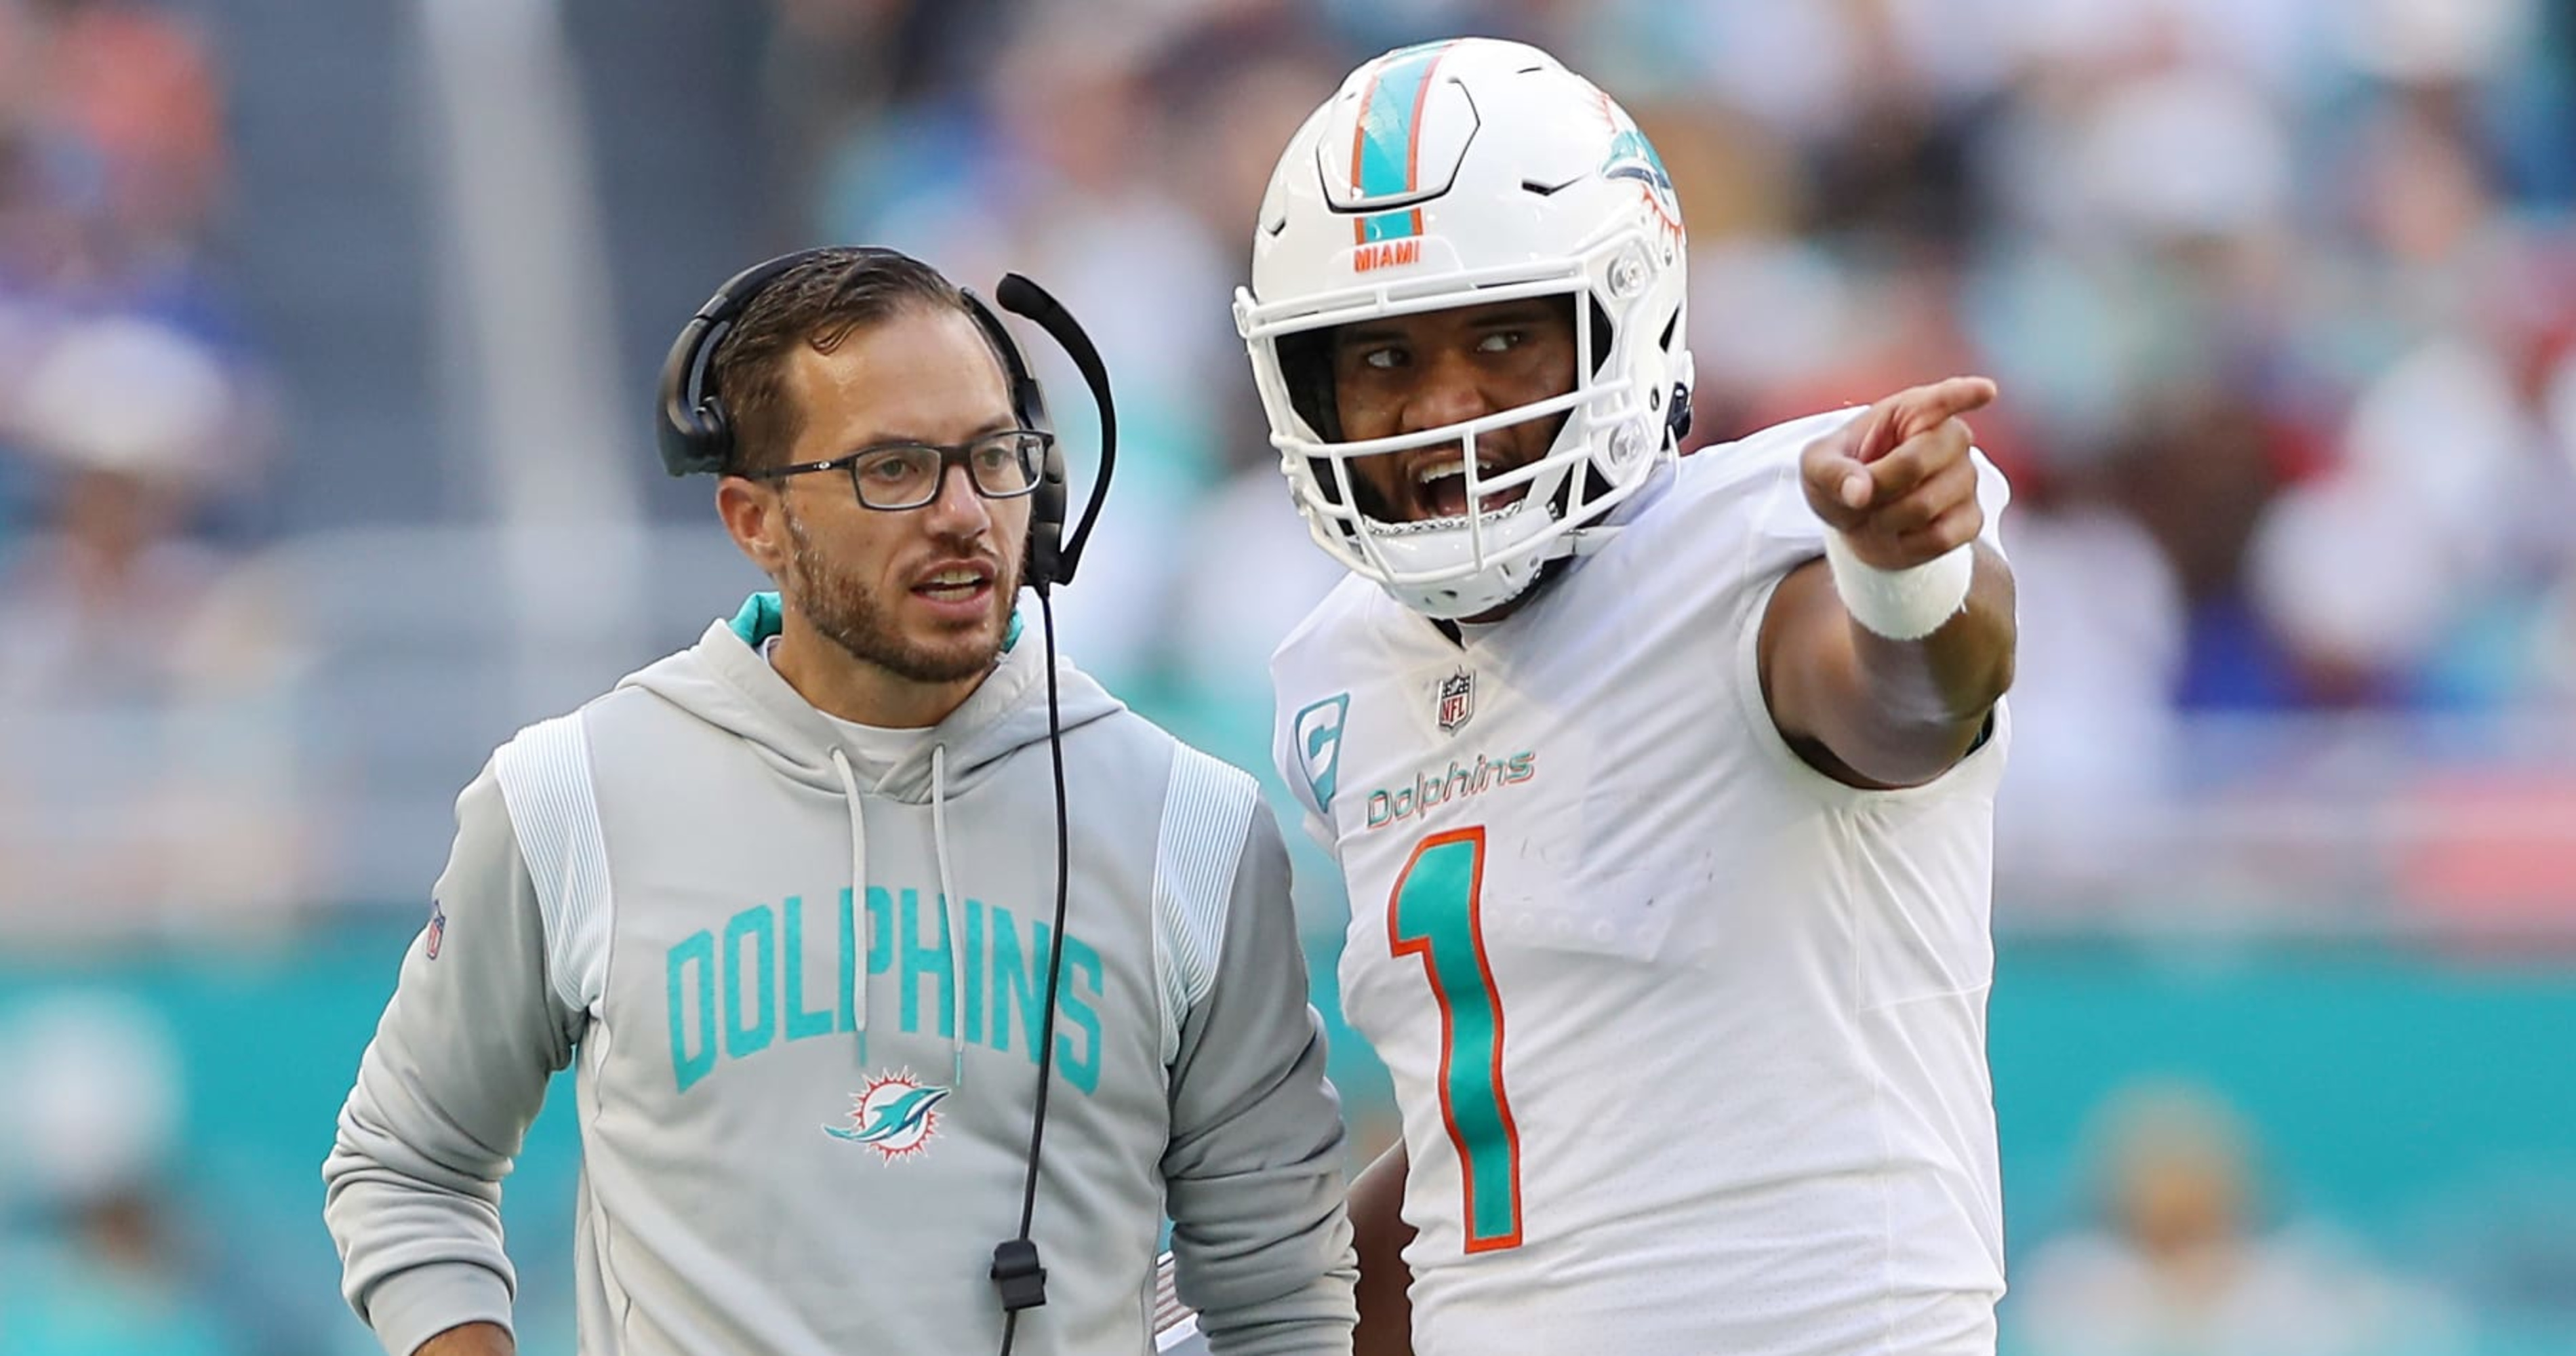 Mike McDaniel on Dolphins' Handling of Concussions: 'We Don't Mess